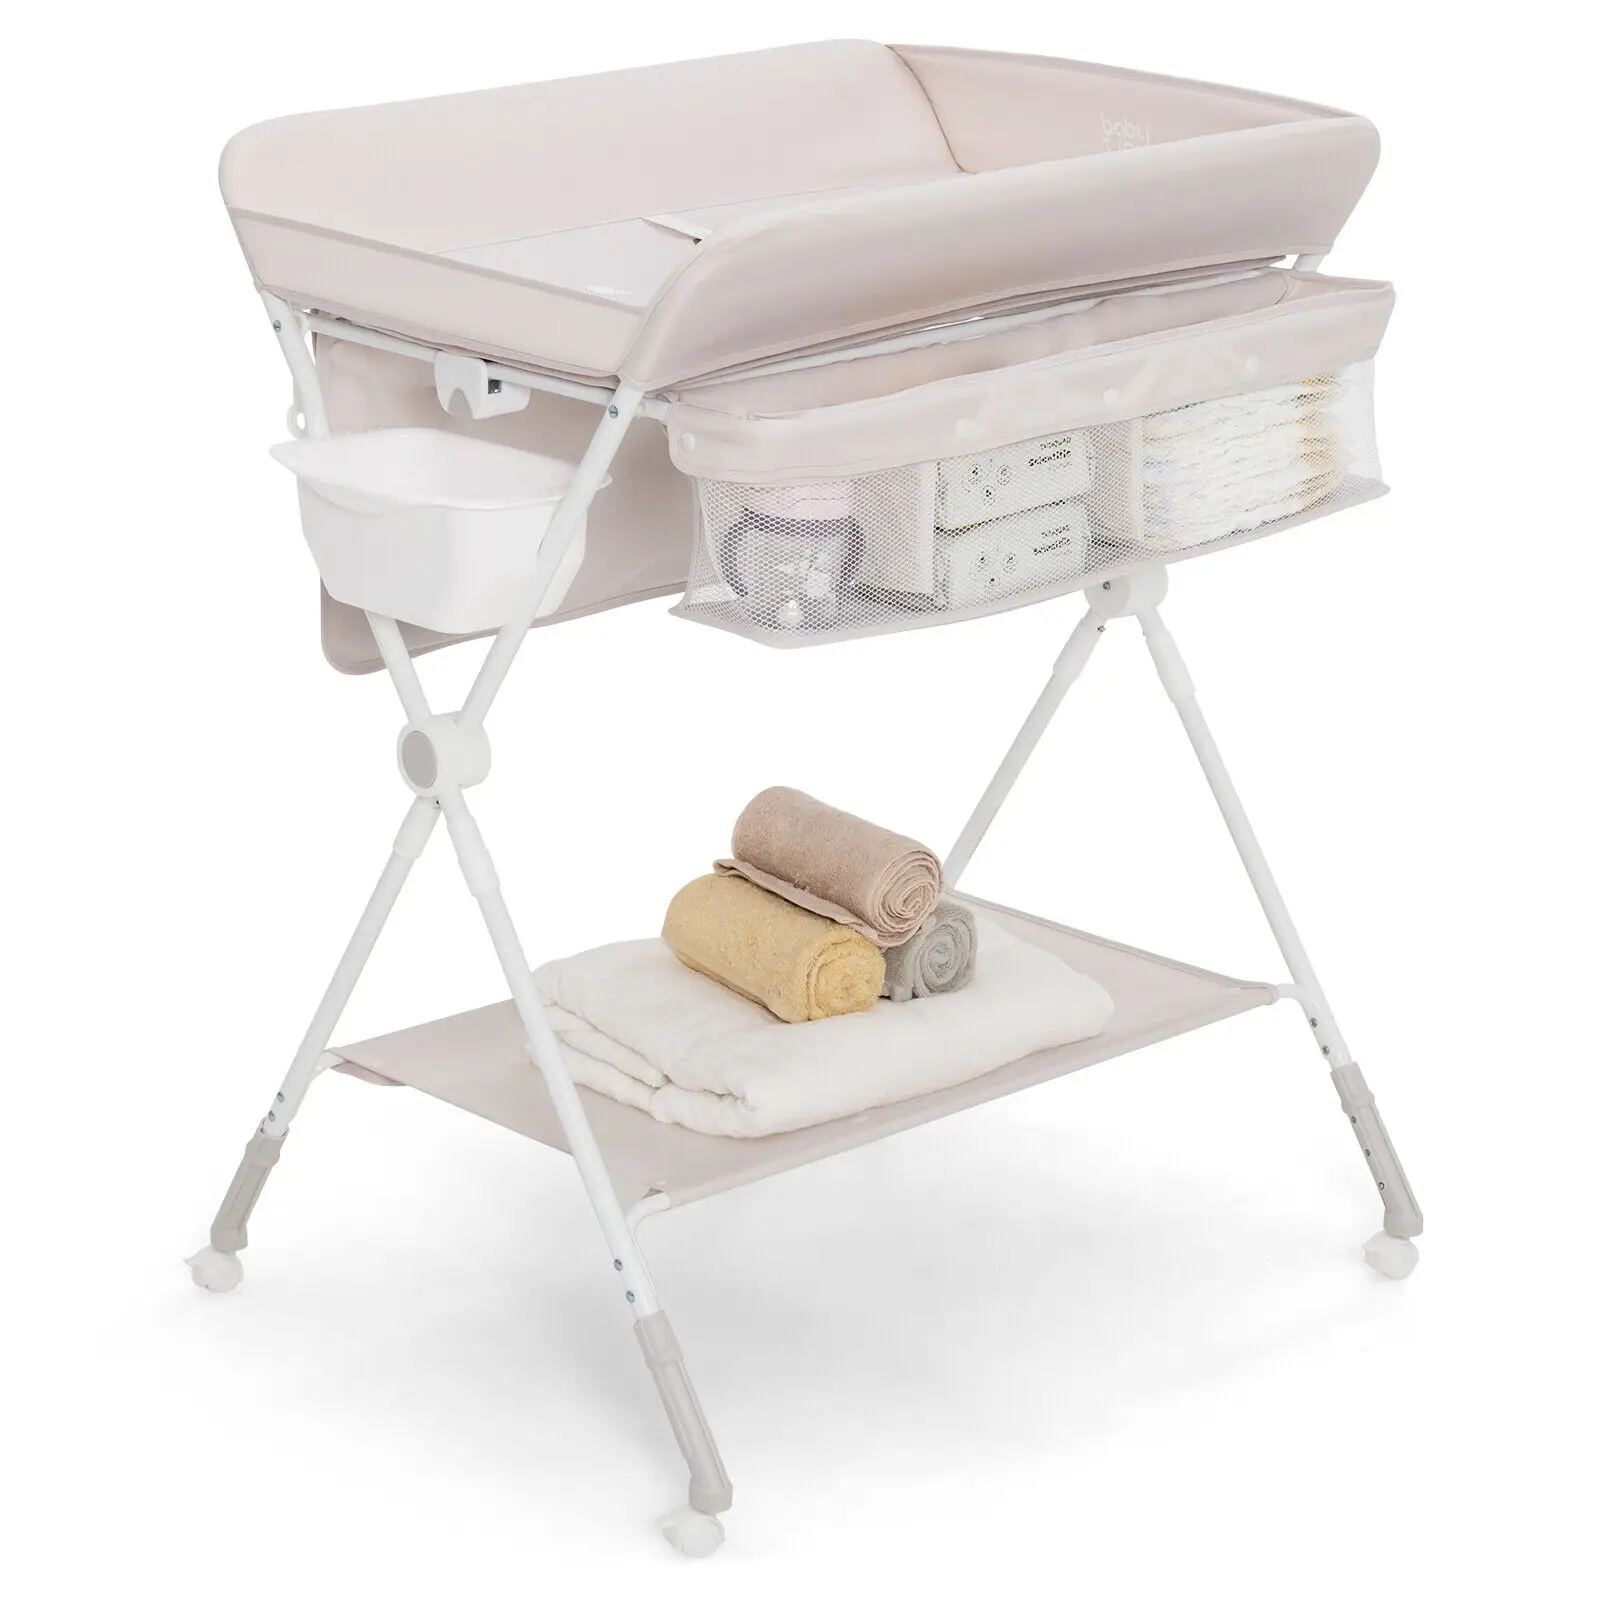 Babyjoy Foldable Baby Diaper Changing Table Mobile Nursery Organizer for Newborn Beige